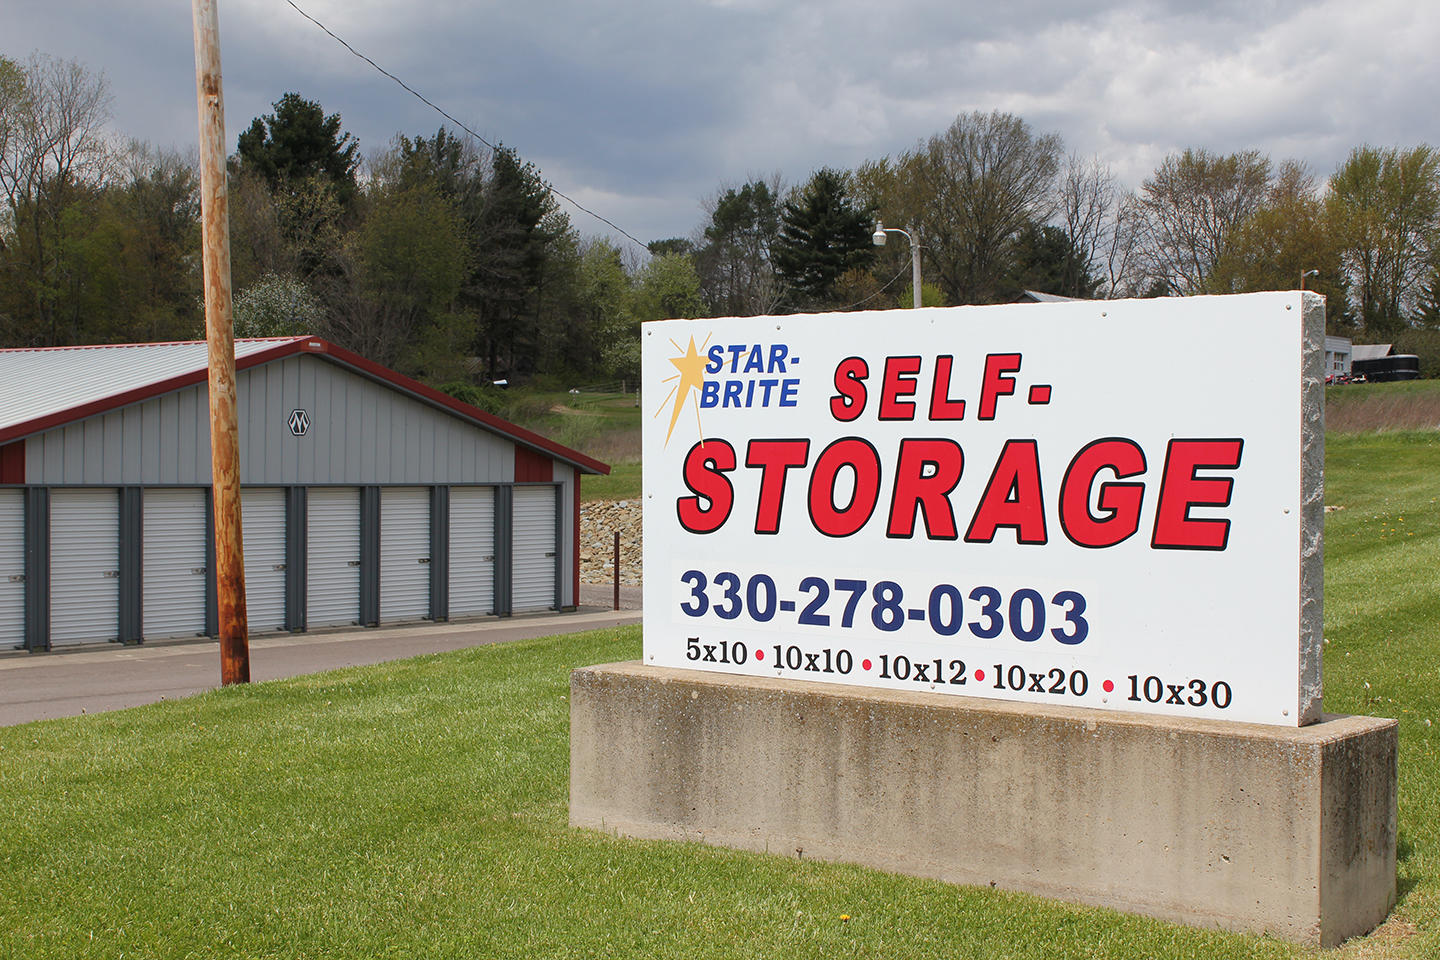 You can drive up to each self-storage unit for easy loading and unloading, and we provide a secure lock for your door so you can be assured your contents are safe and secure.